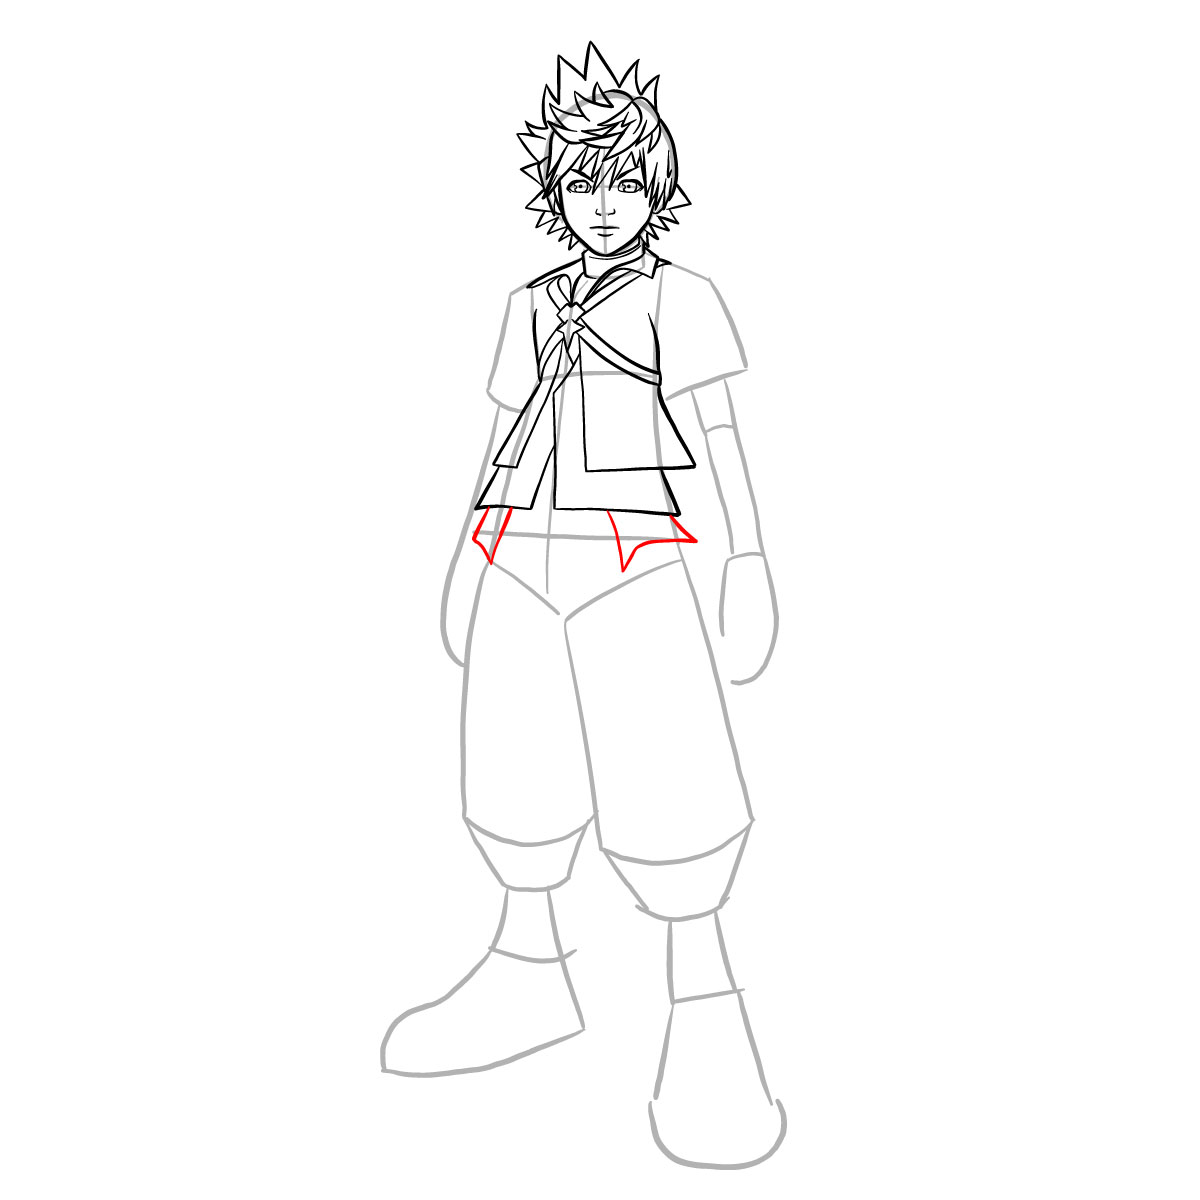 How to draw Ventus - step 23